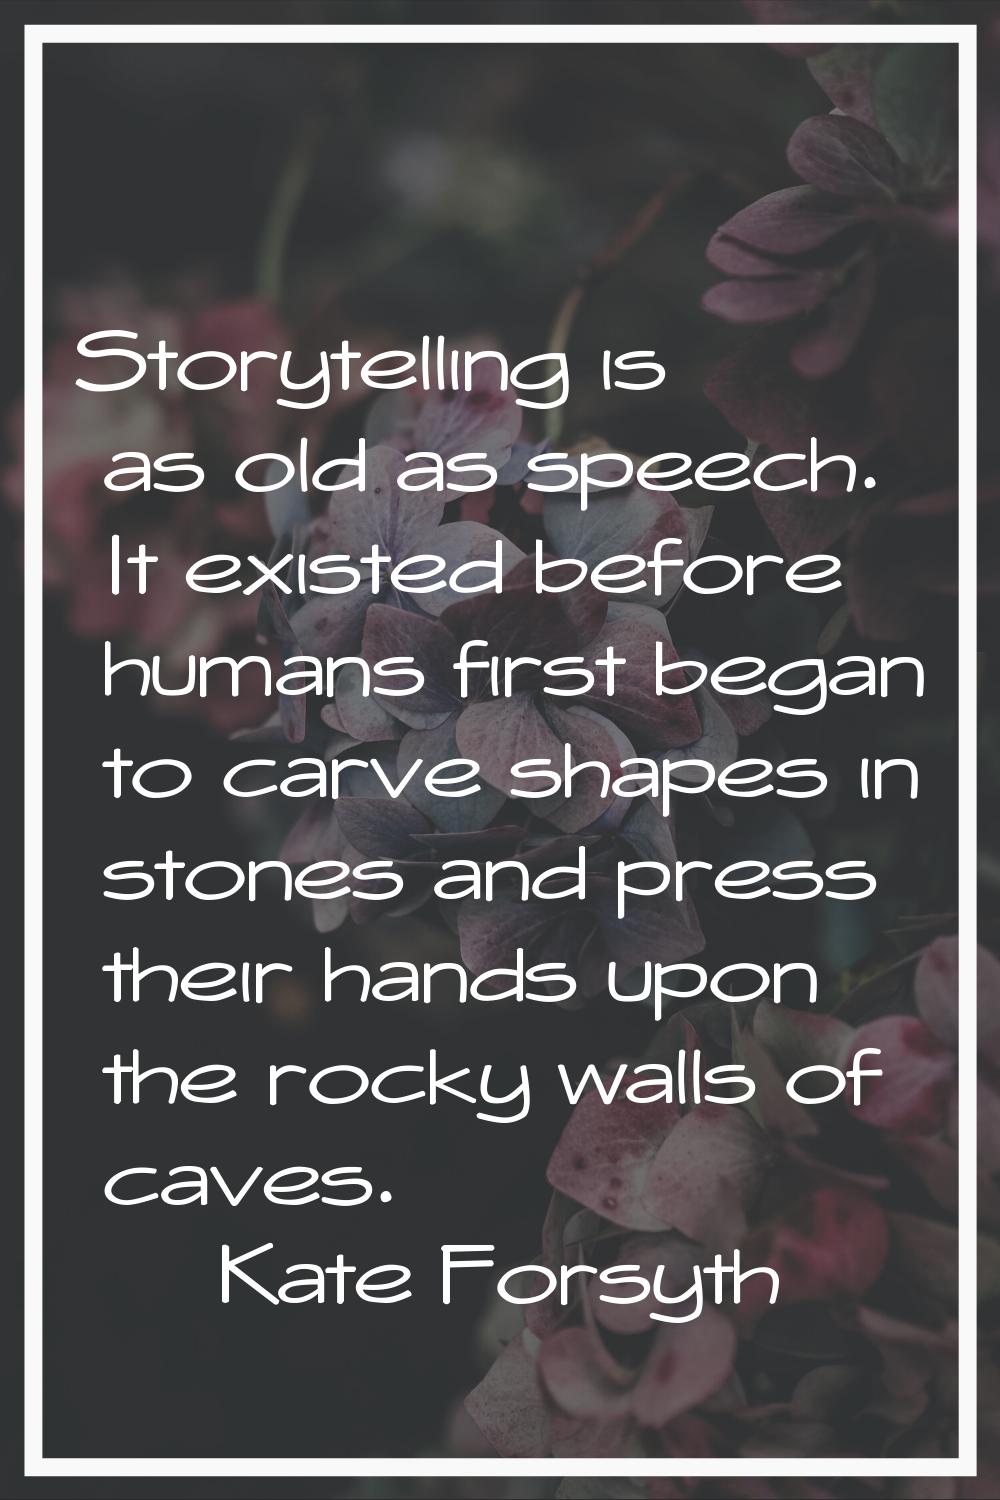 Storytelling is as old as speech. It existed before humans first began to carve shapes in stones an